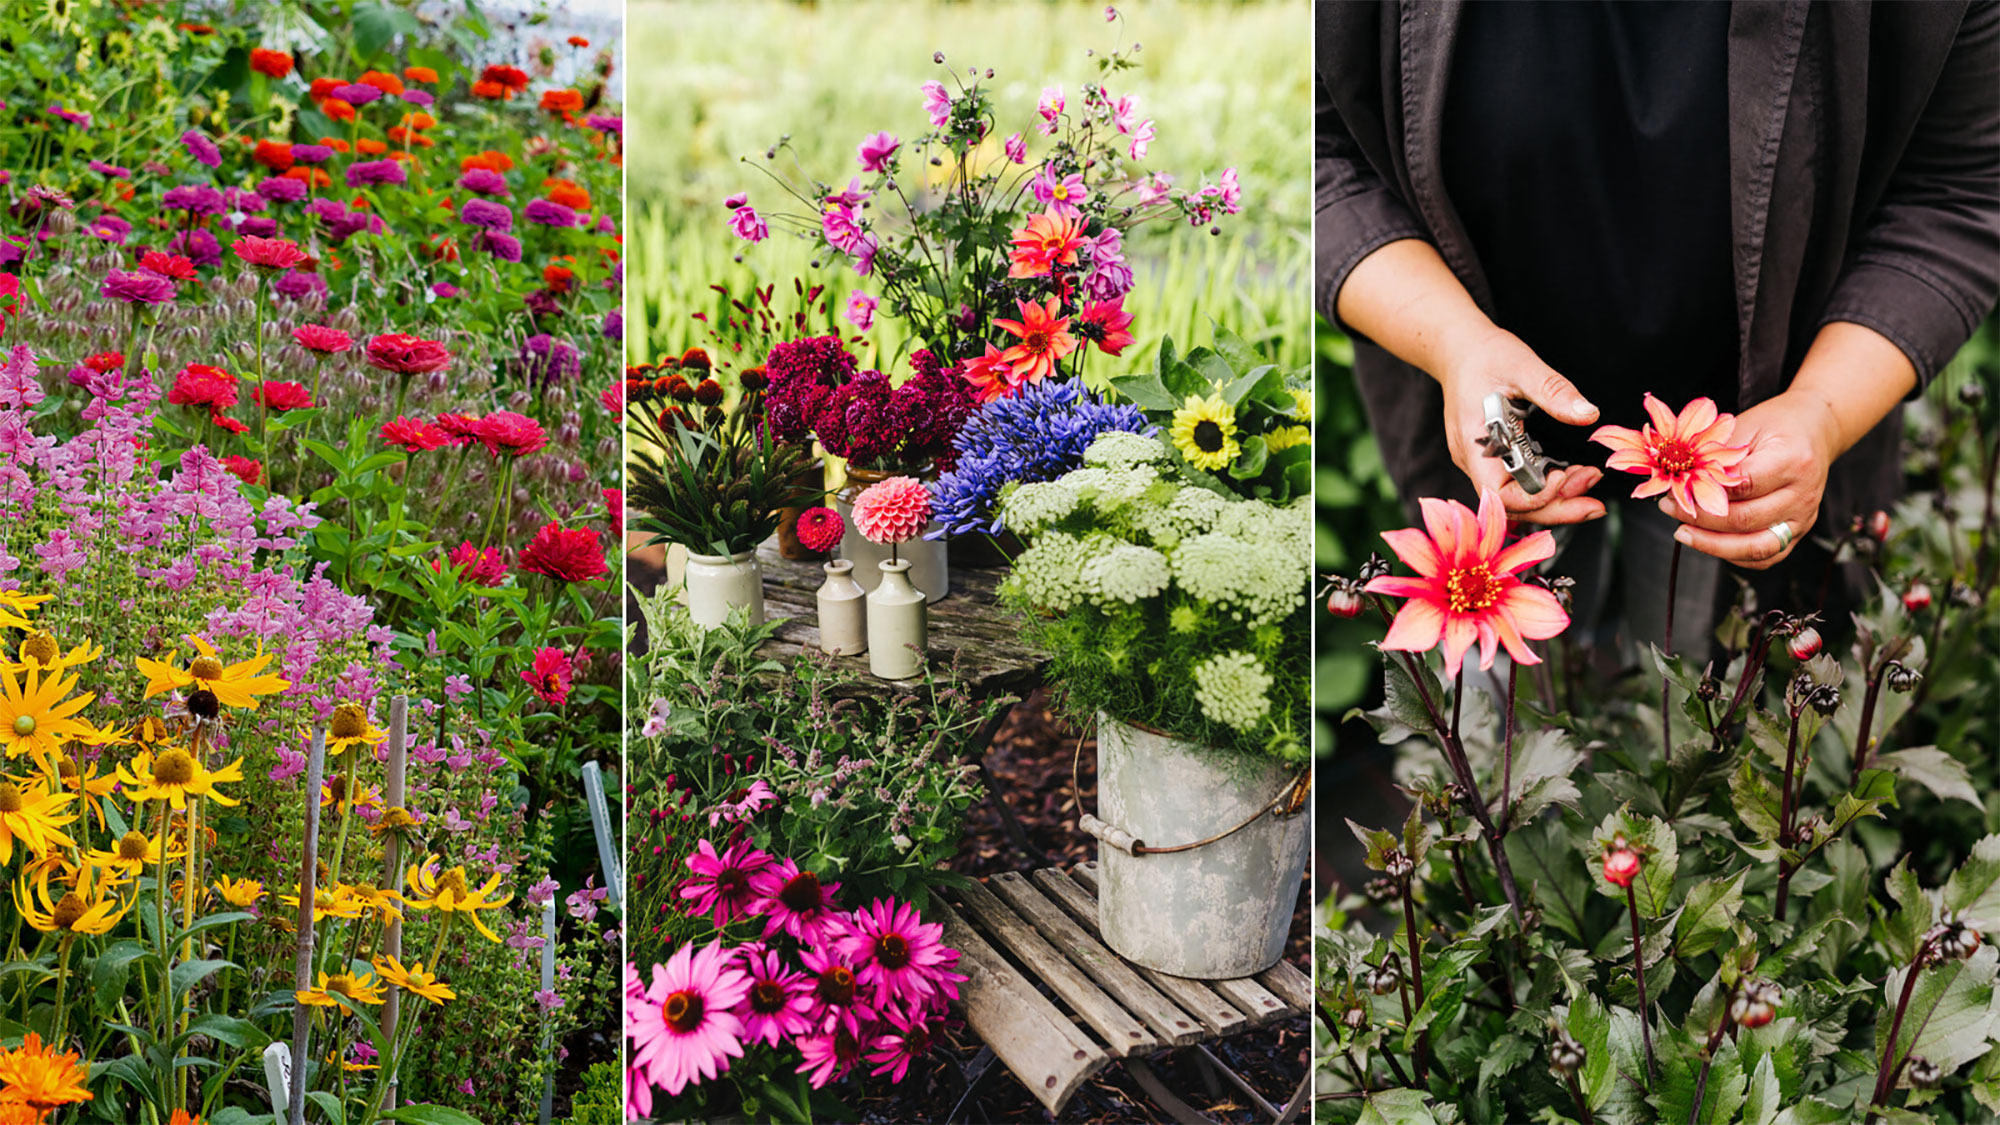 Planning a cut flower garden – grow beautiful blooms for decorating your home